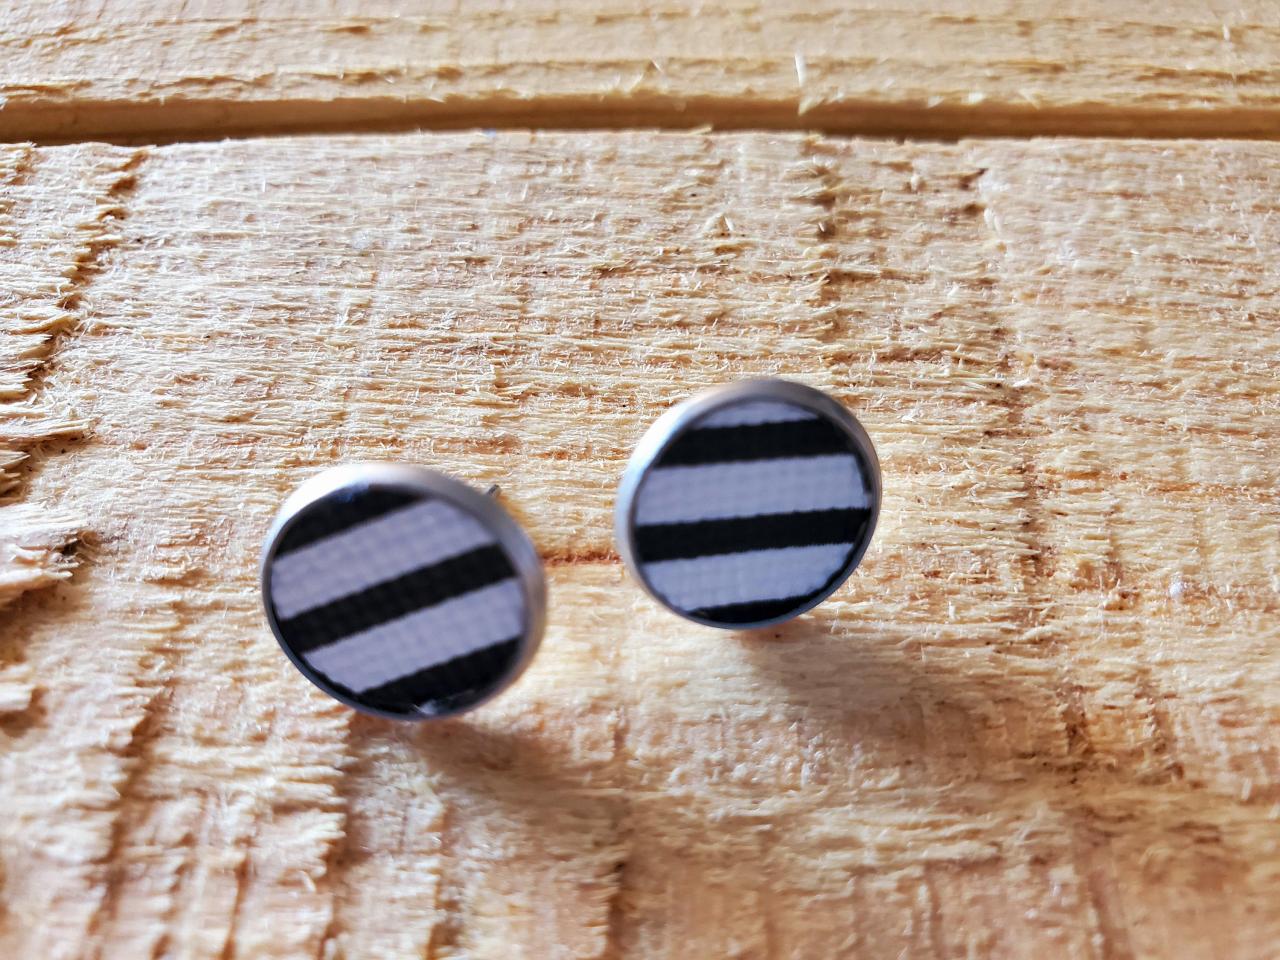 Black And White Striped Leather Stud Earrings, Striped Post Earrings, Dainty Earrings, Black And White Earrings, Minimalist Earrings, Gift